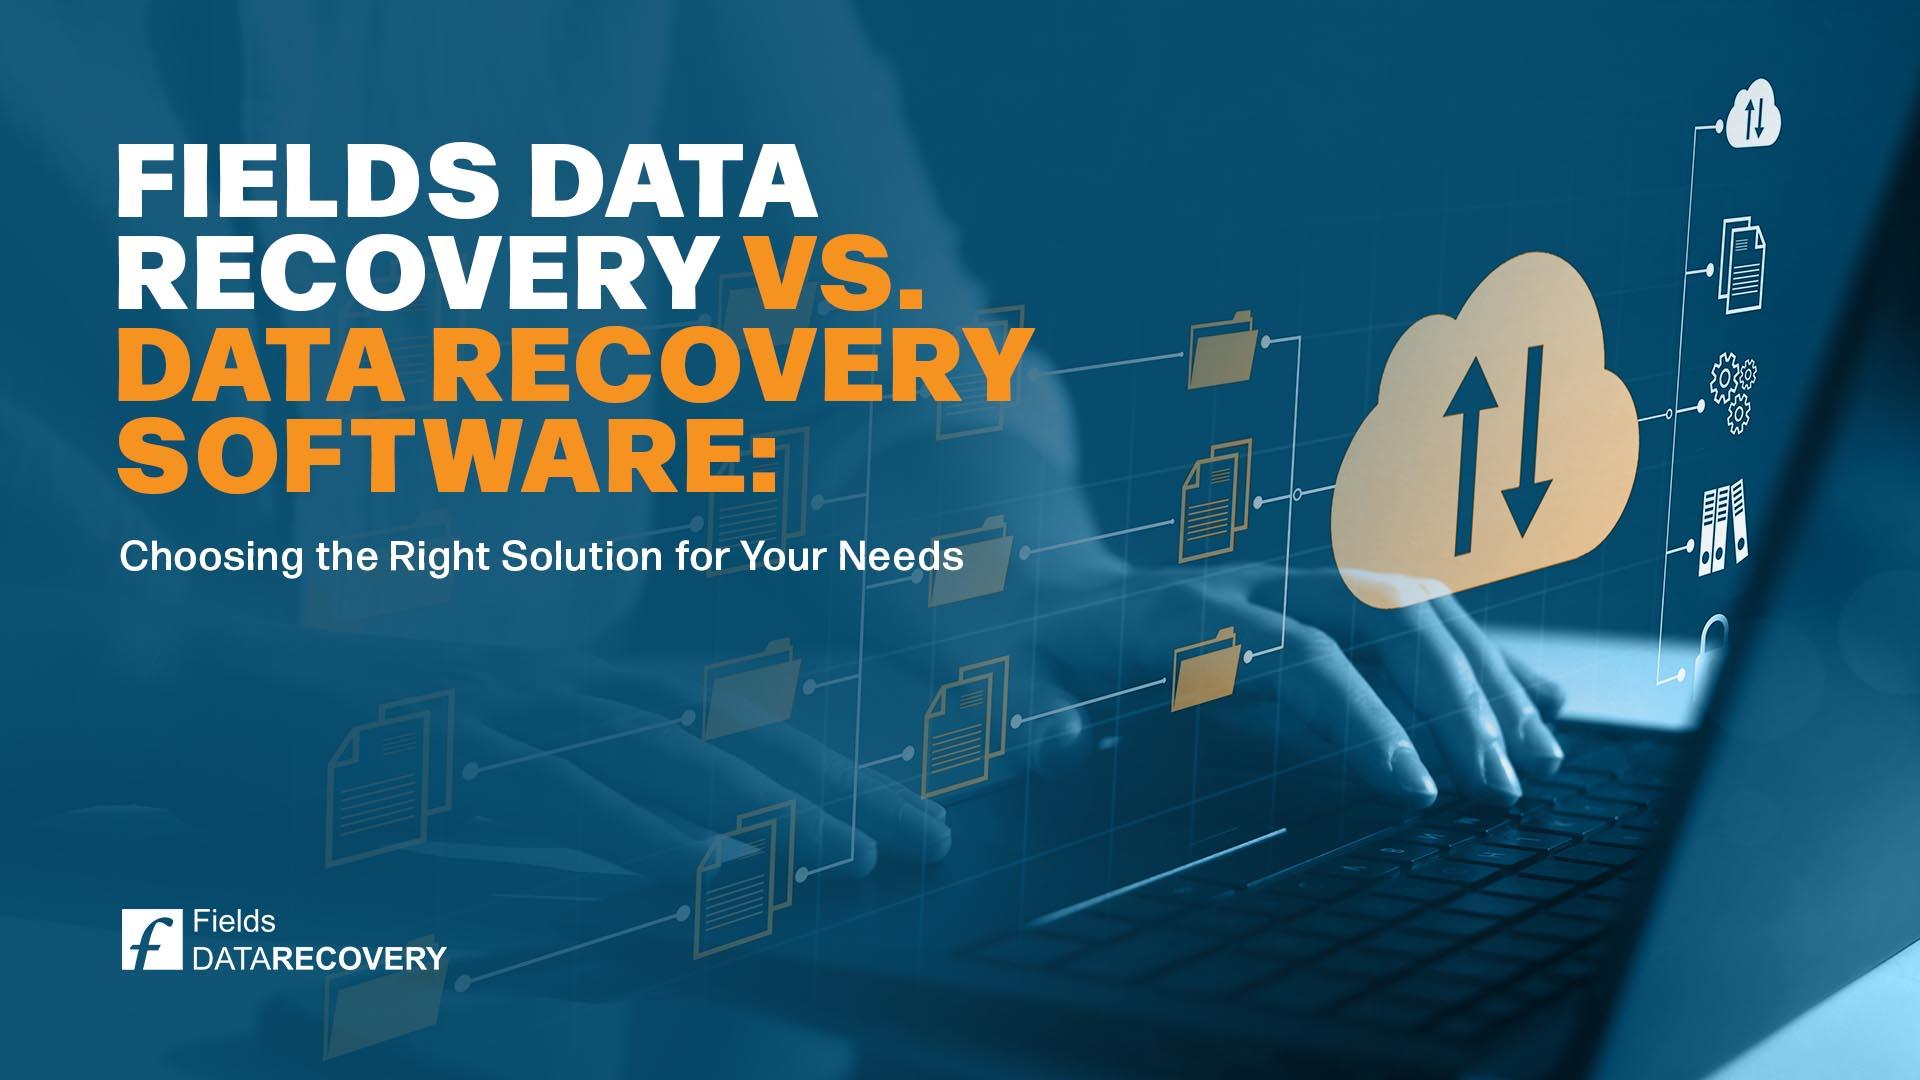 Fields Data Recovery vs. Data Recovery Software: Choosing the Right Solution for Your Needs